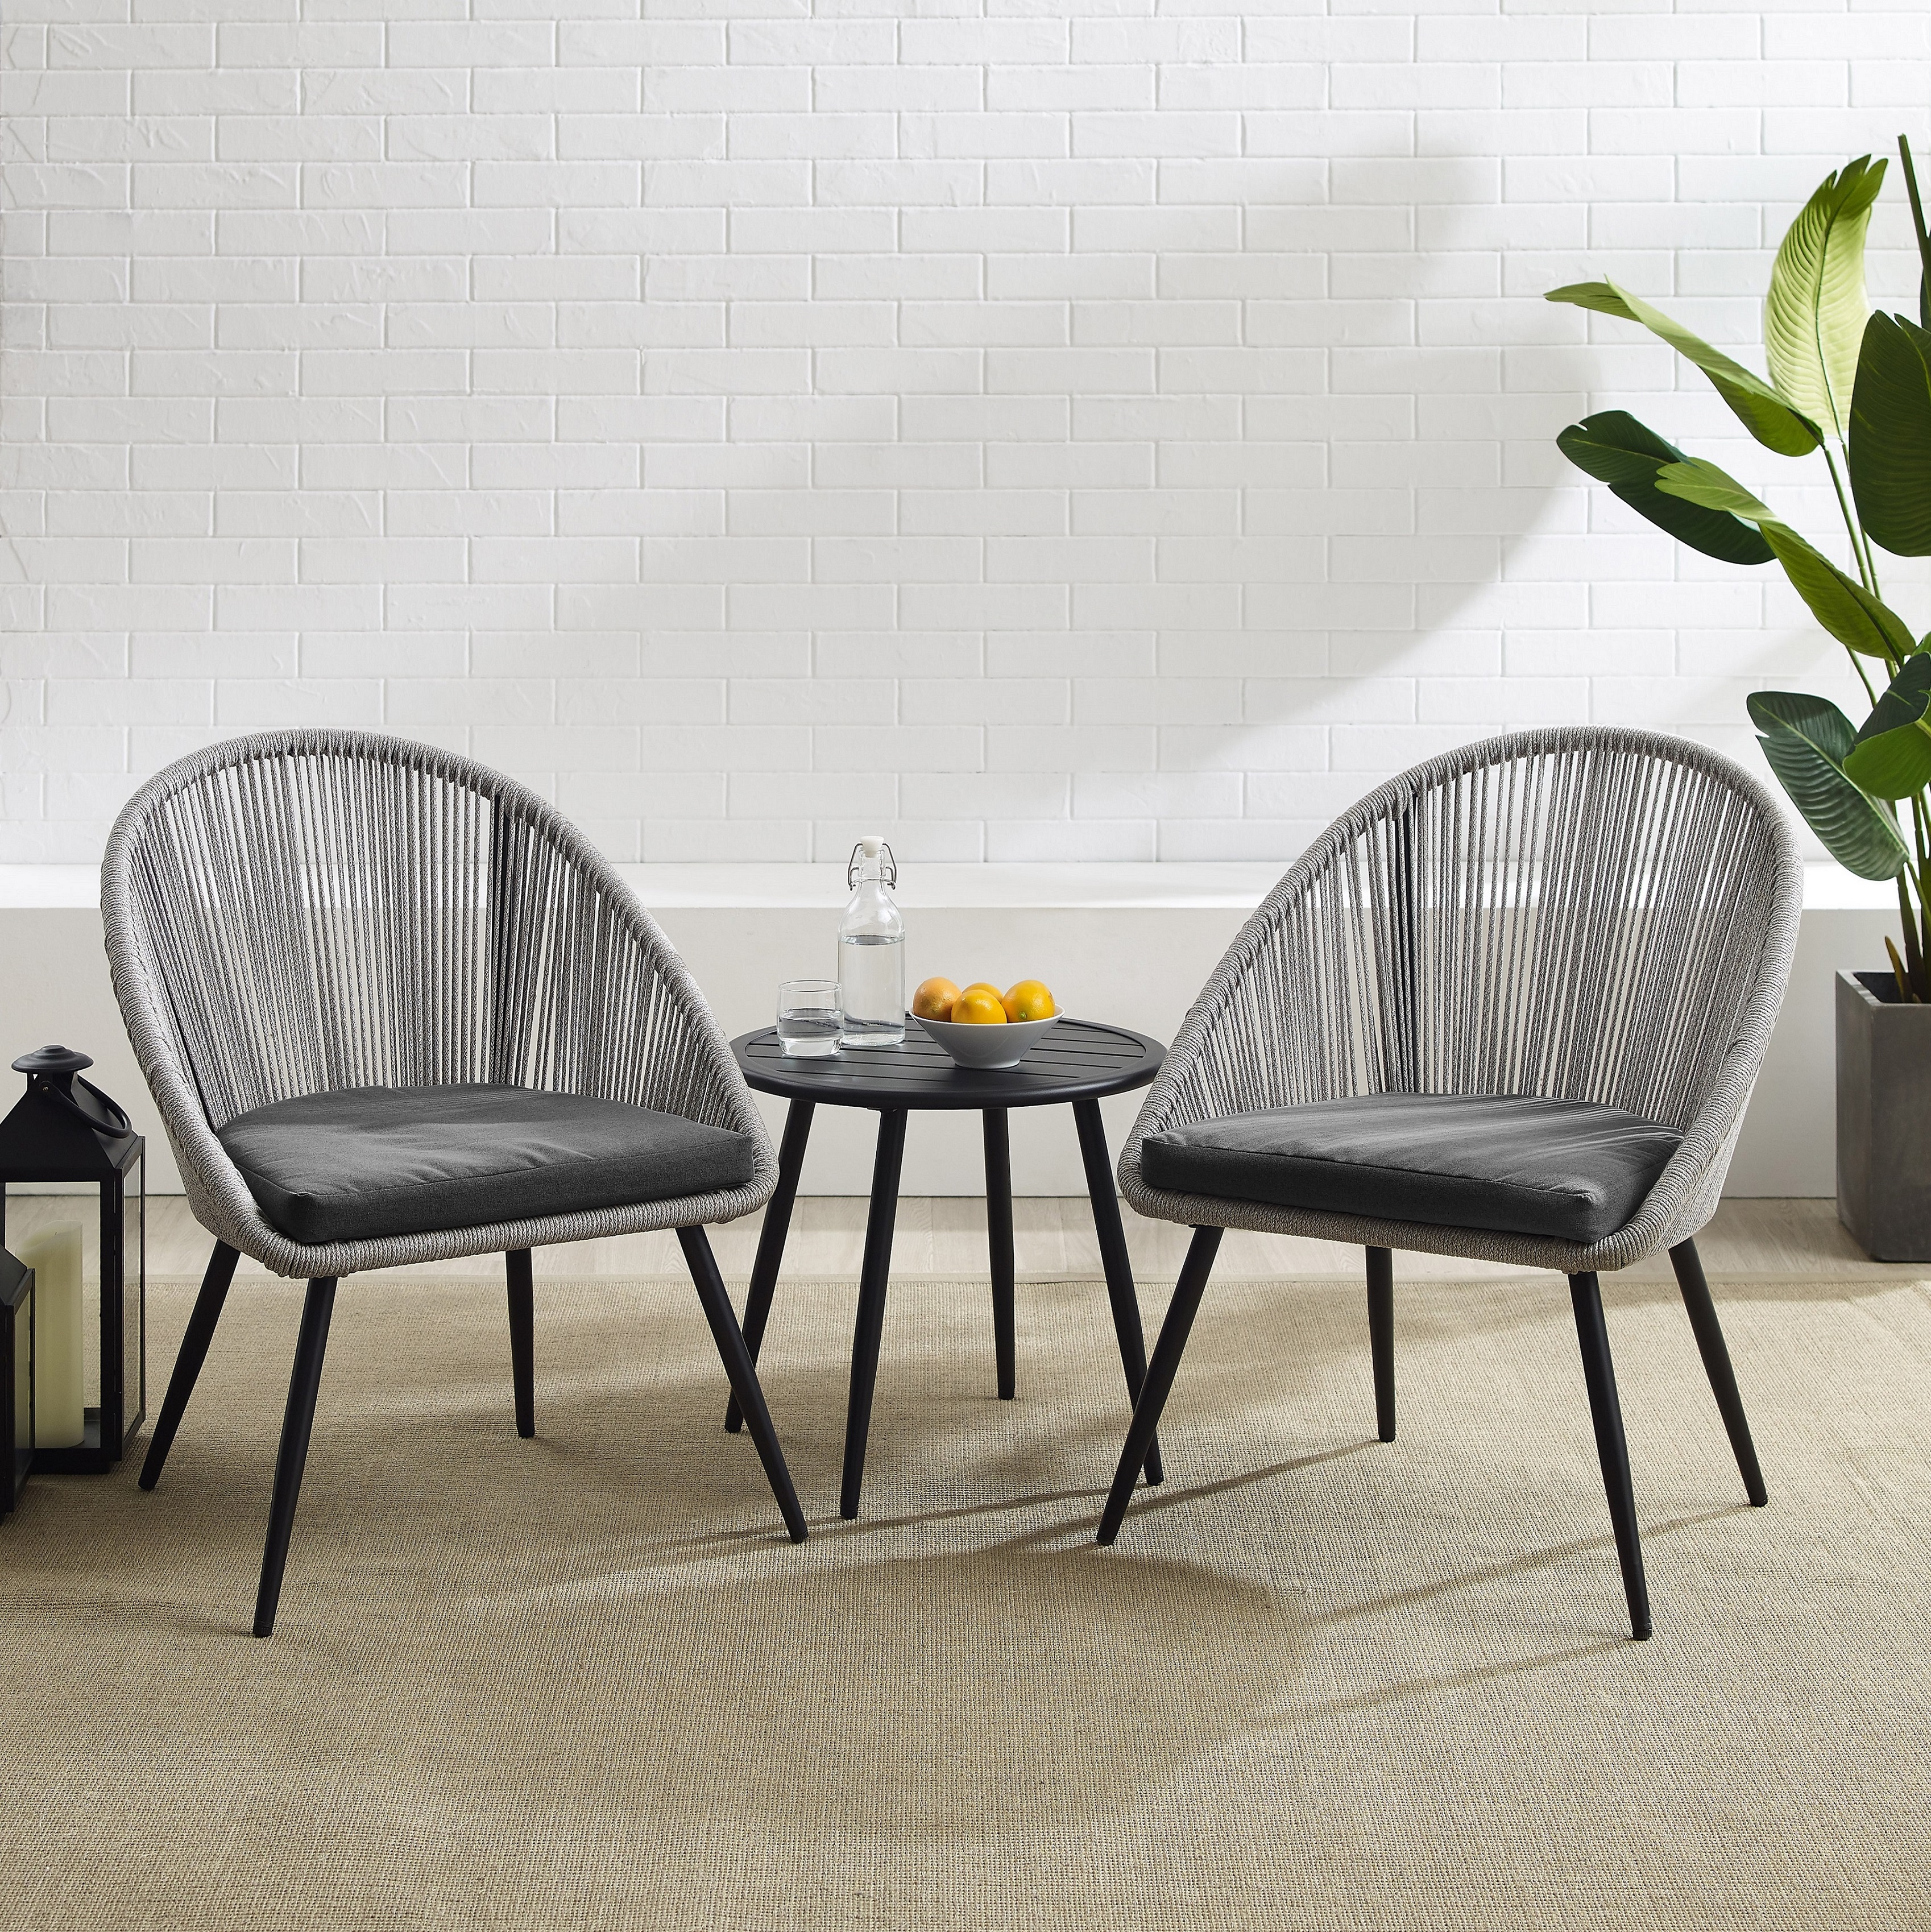 Crosley Furniture Aspen 3Pc Outdoor Rope Chair Set Gray/Matte Black - Side Table & 2 Chairs - image 2 of 17